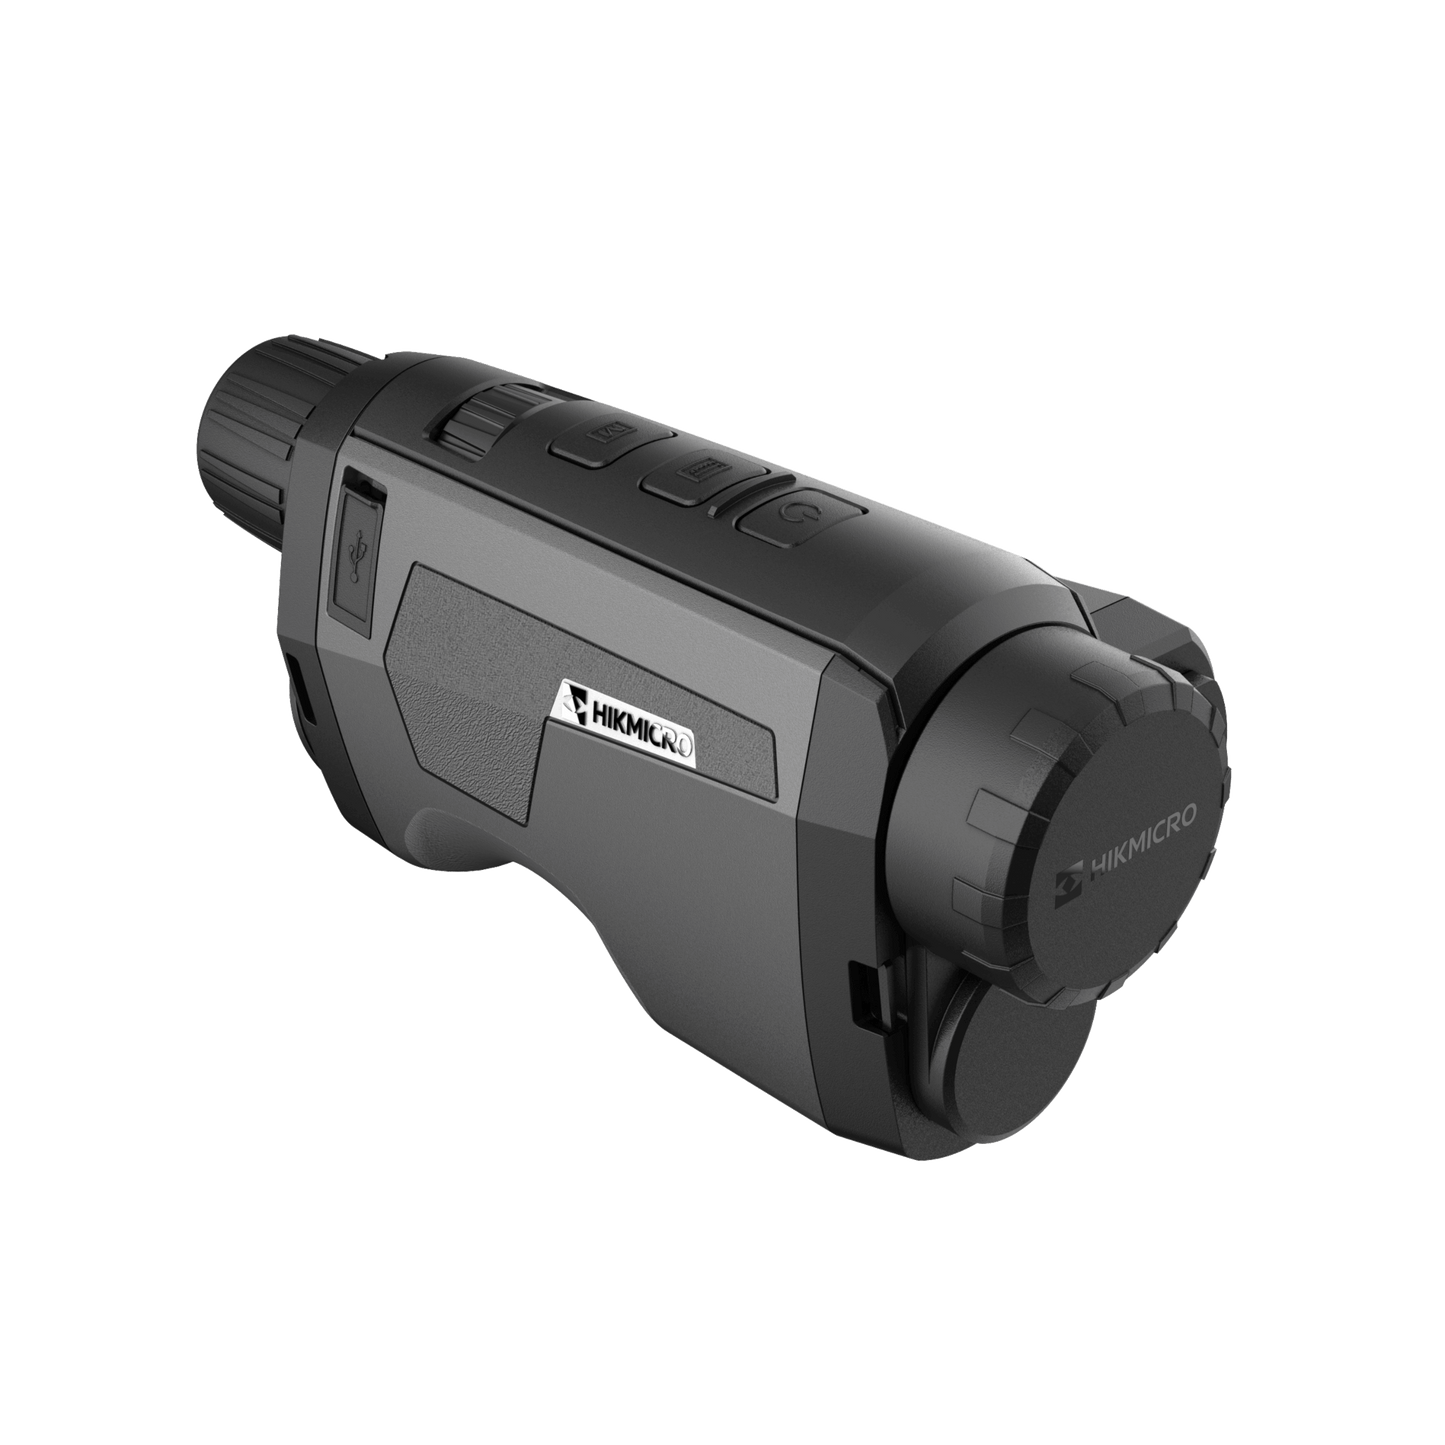 Cape Thermal imaging monocular for sale - HikMicro Gryphon GH35L Handheld thermal monocular front left view with lens cap fitted and no eye piece